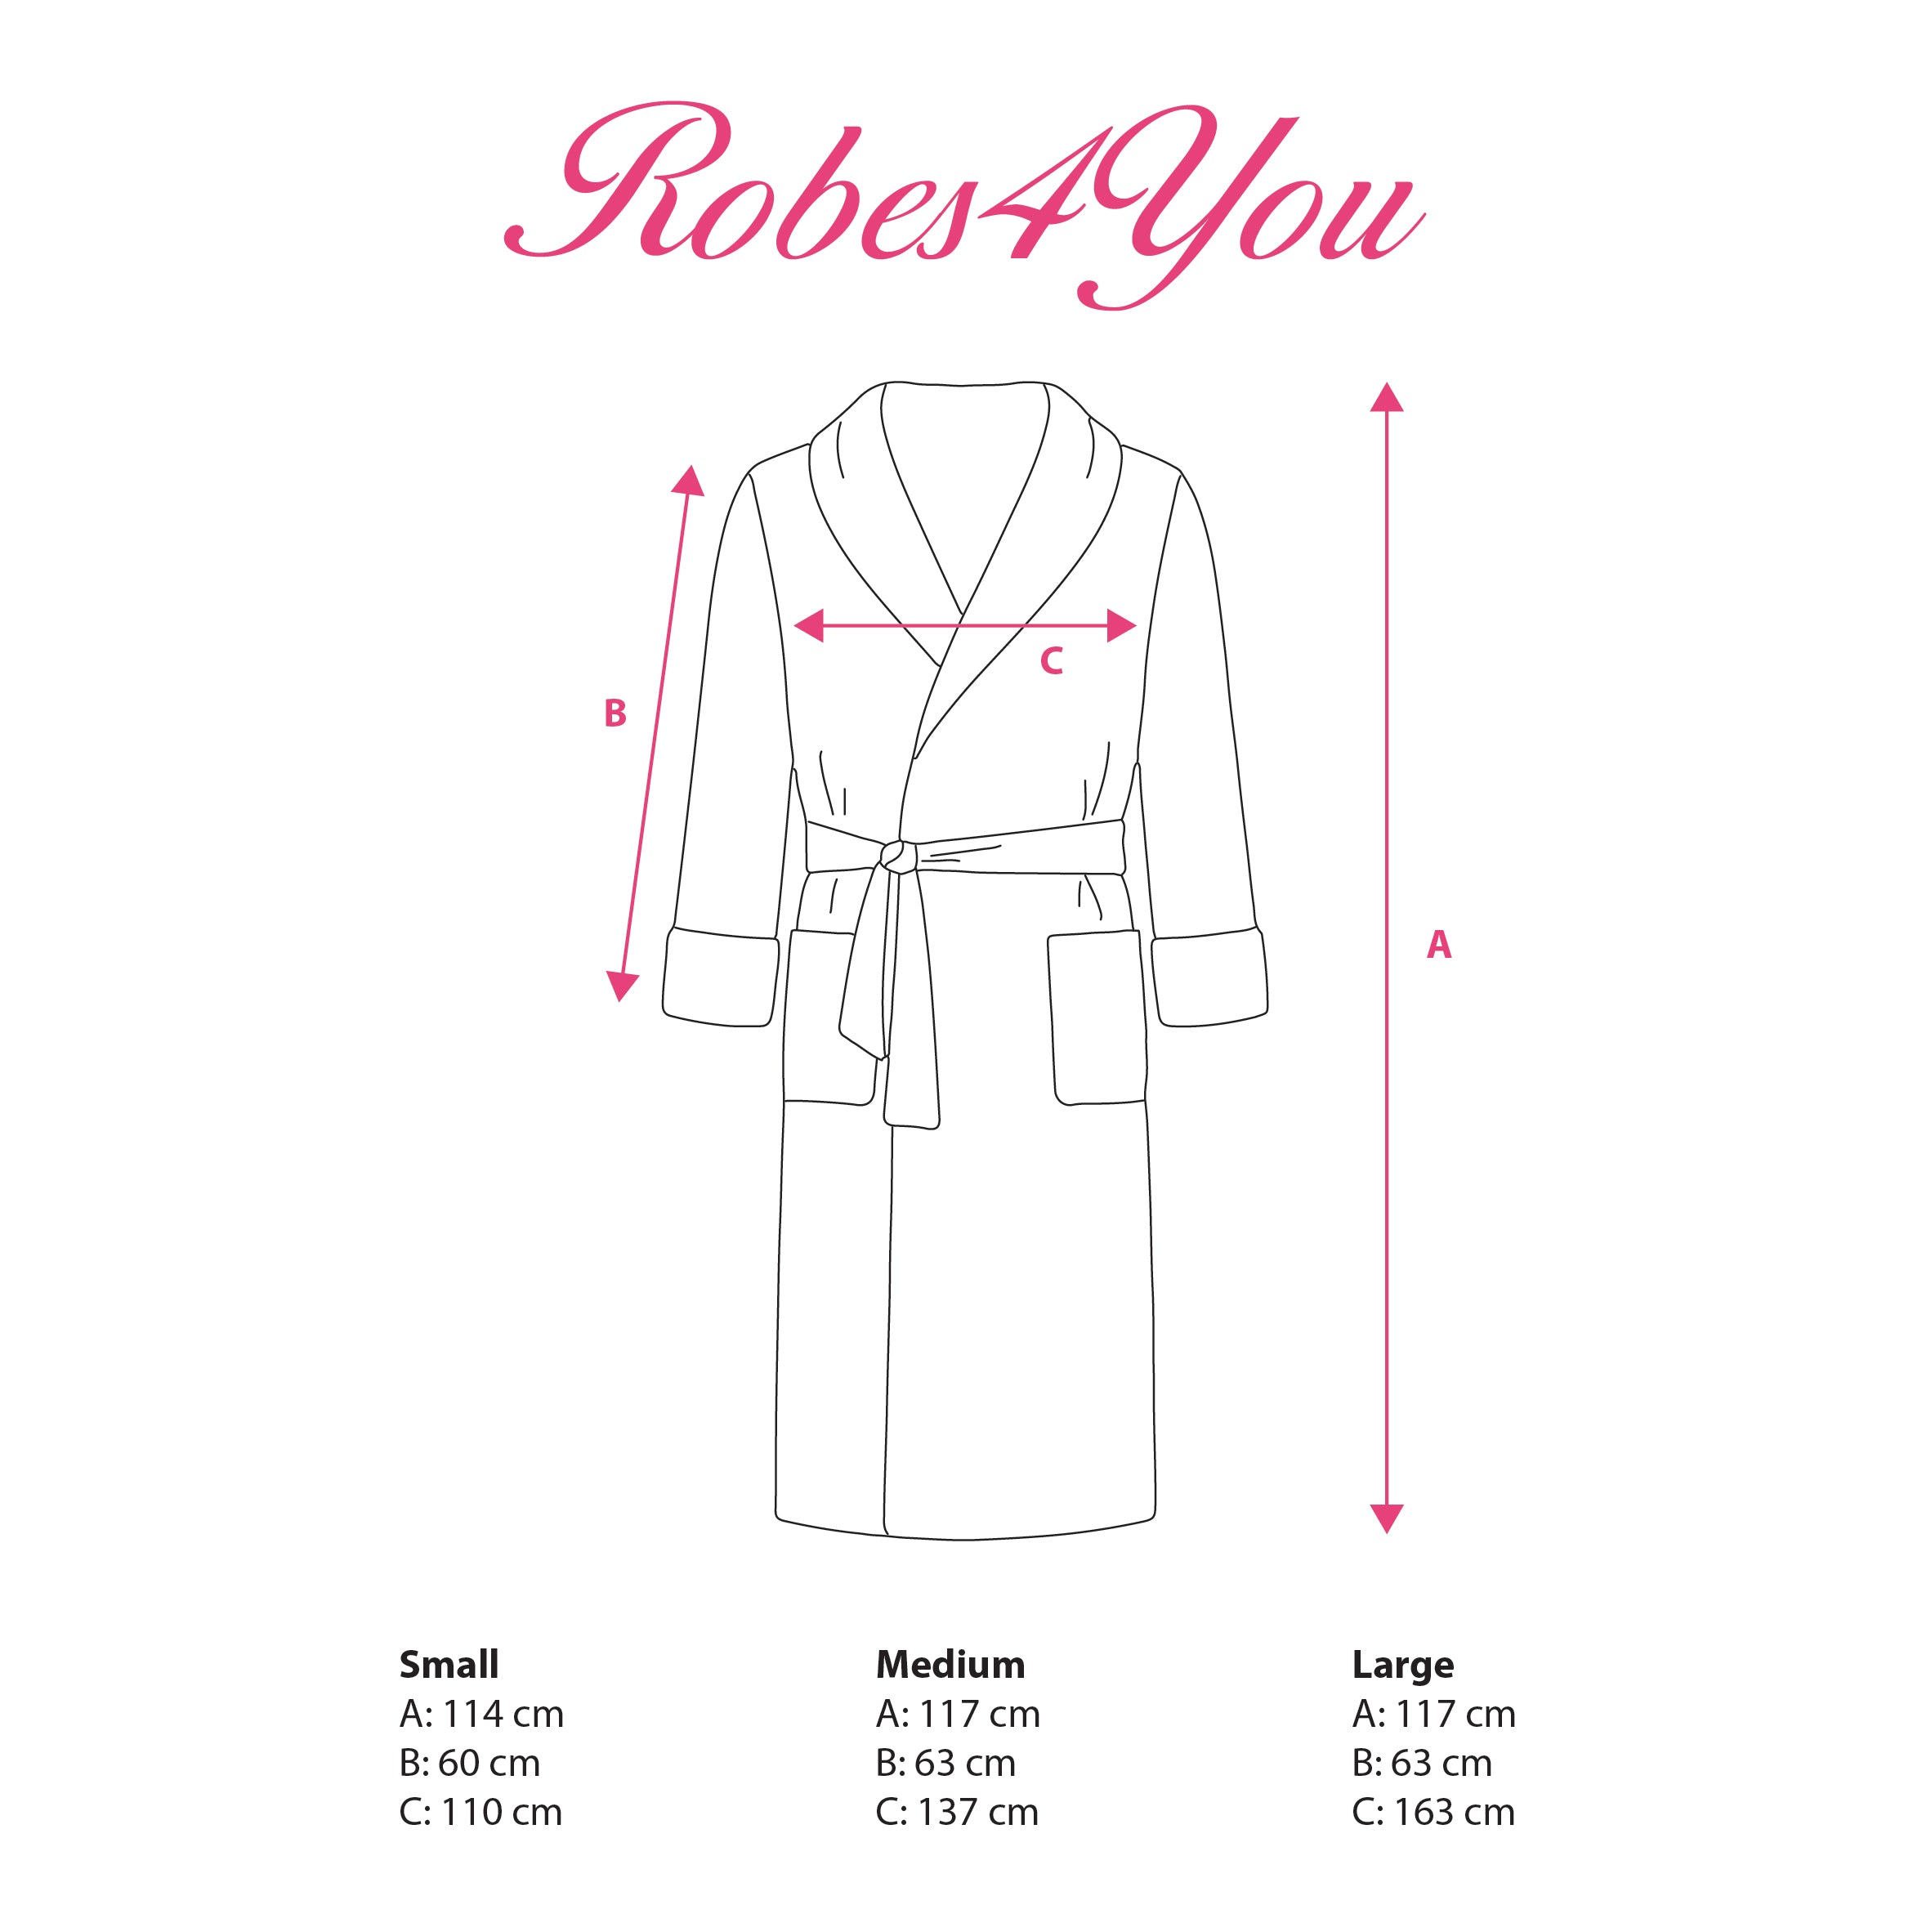 robes sizing measurements- robes4you  